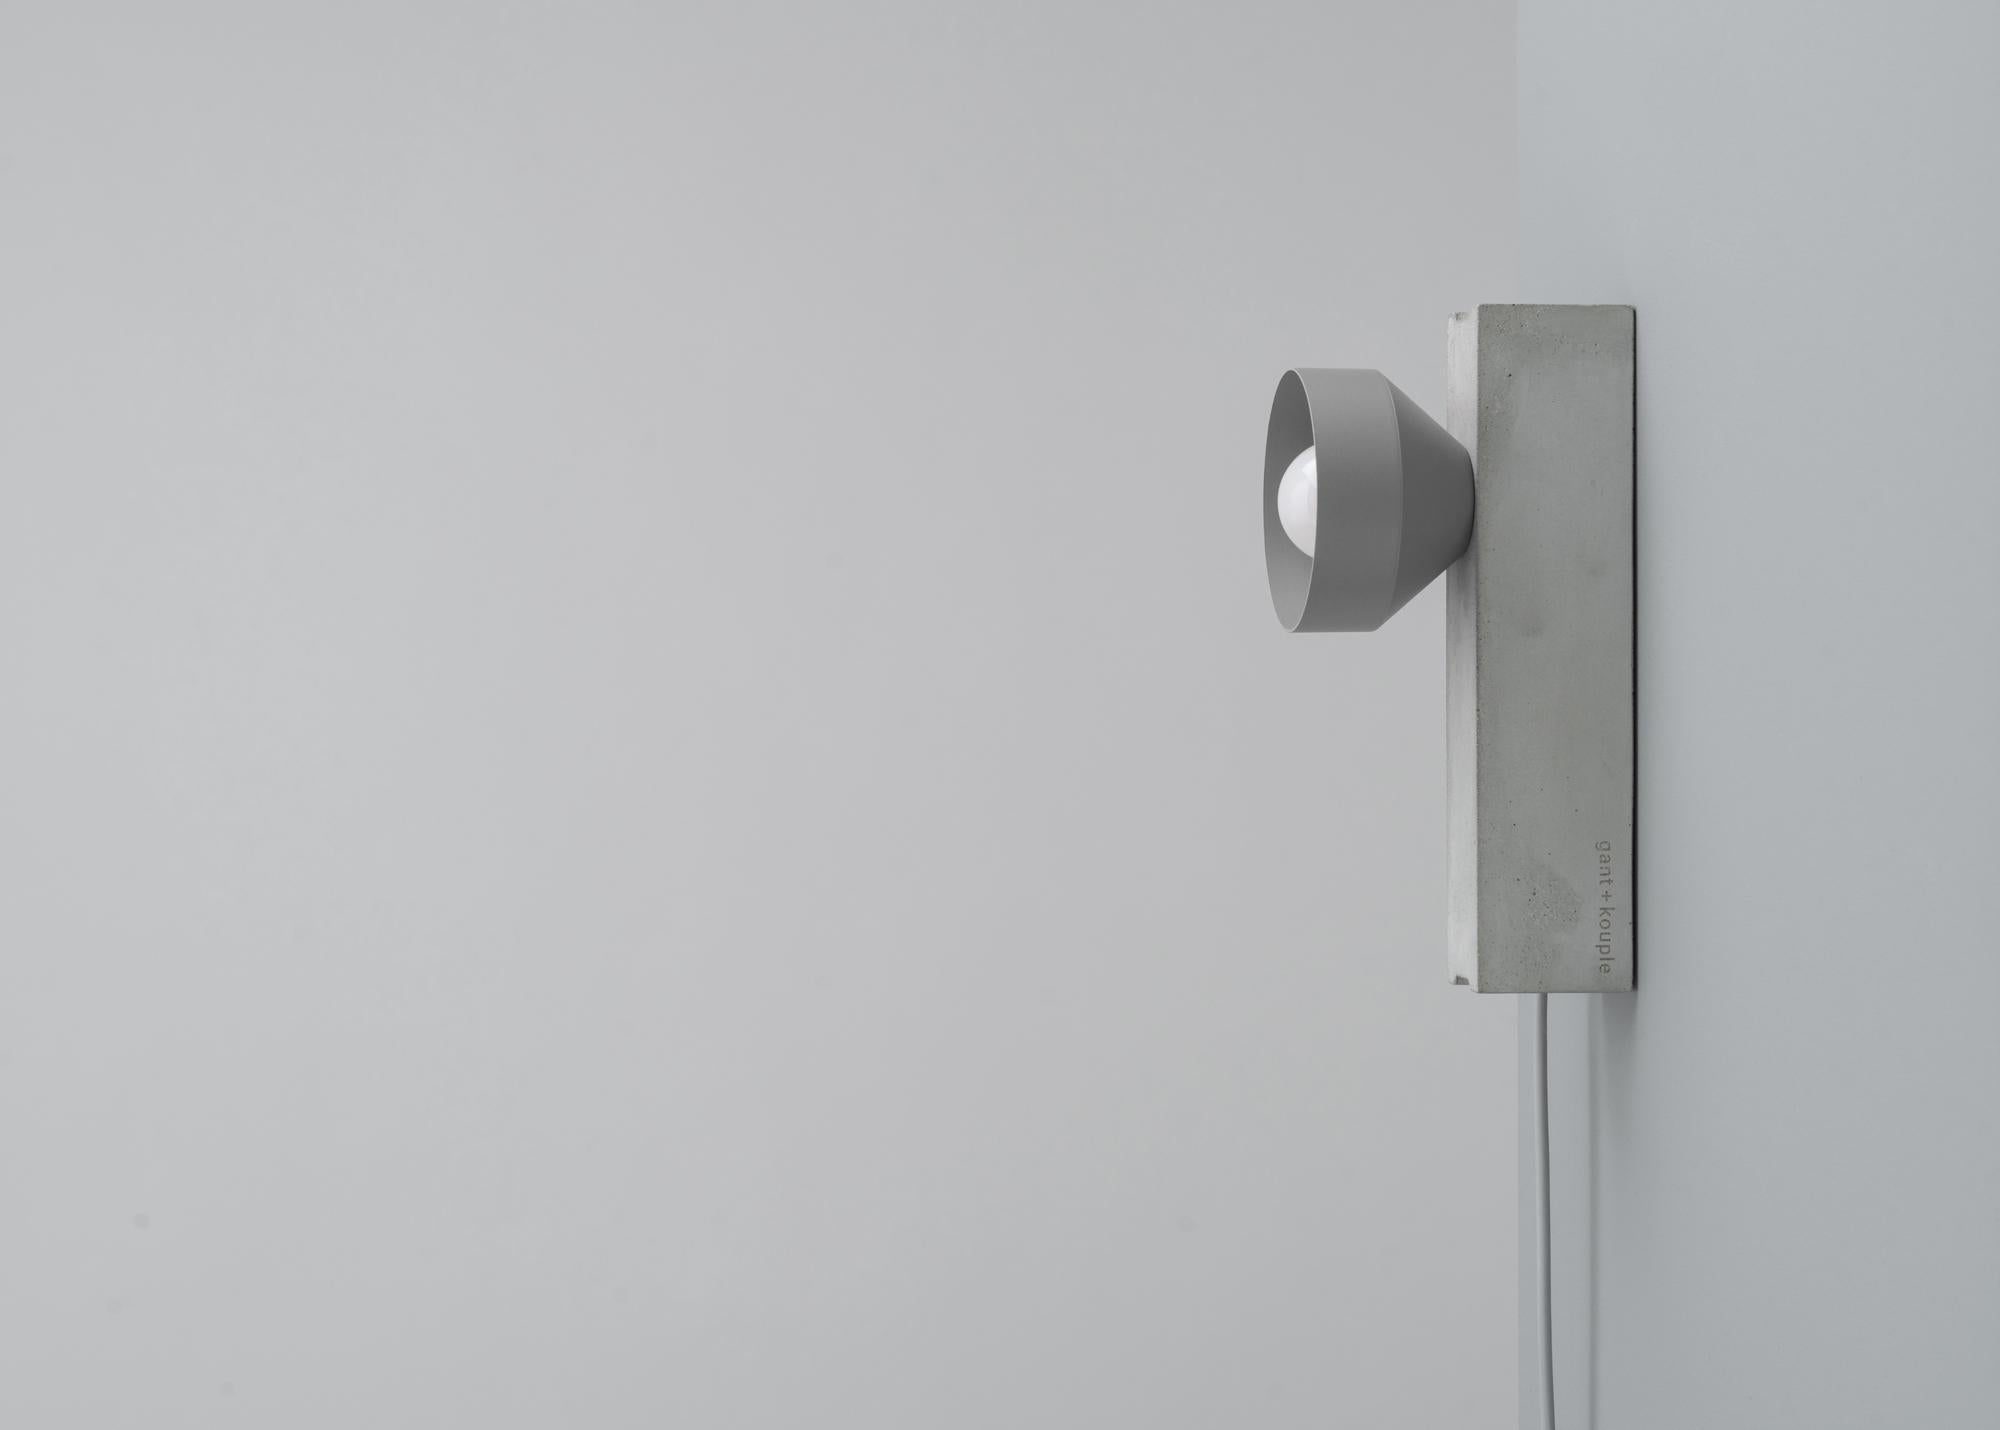 Grey Block Wall Lamp by +kouple
Dimensions: D 26 x W 10 x H 12,7 cm.
Materials: Concrete, powder-coated steel and textile. 

Available in different color options. Please contact us.

All our lamps can be wired according to each country. If sold to